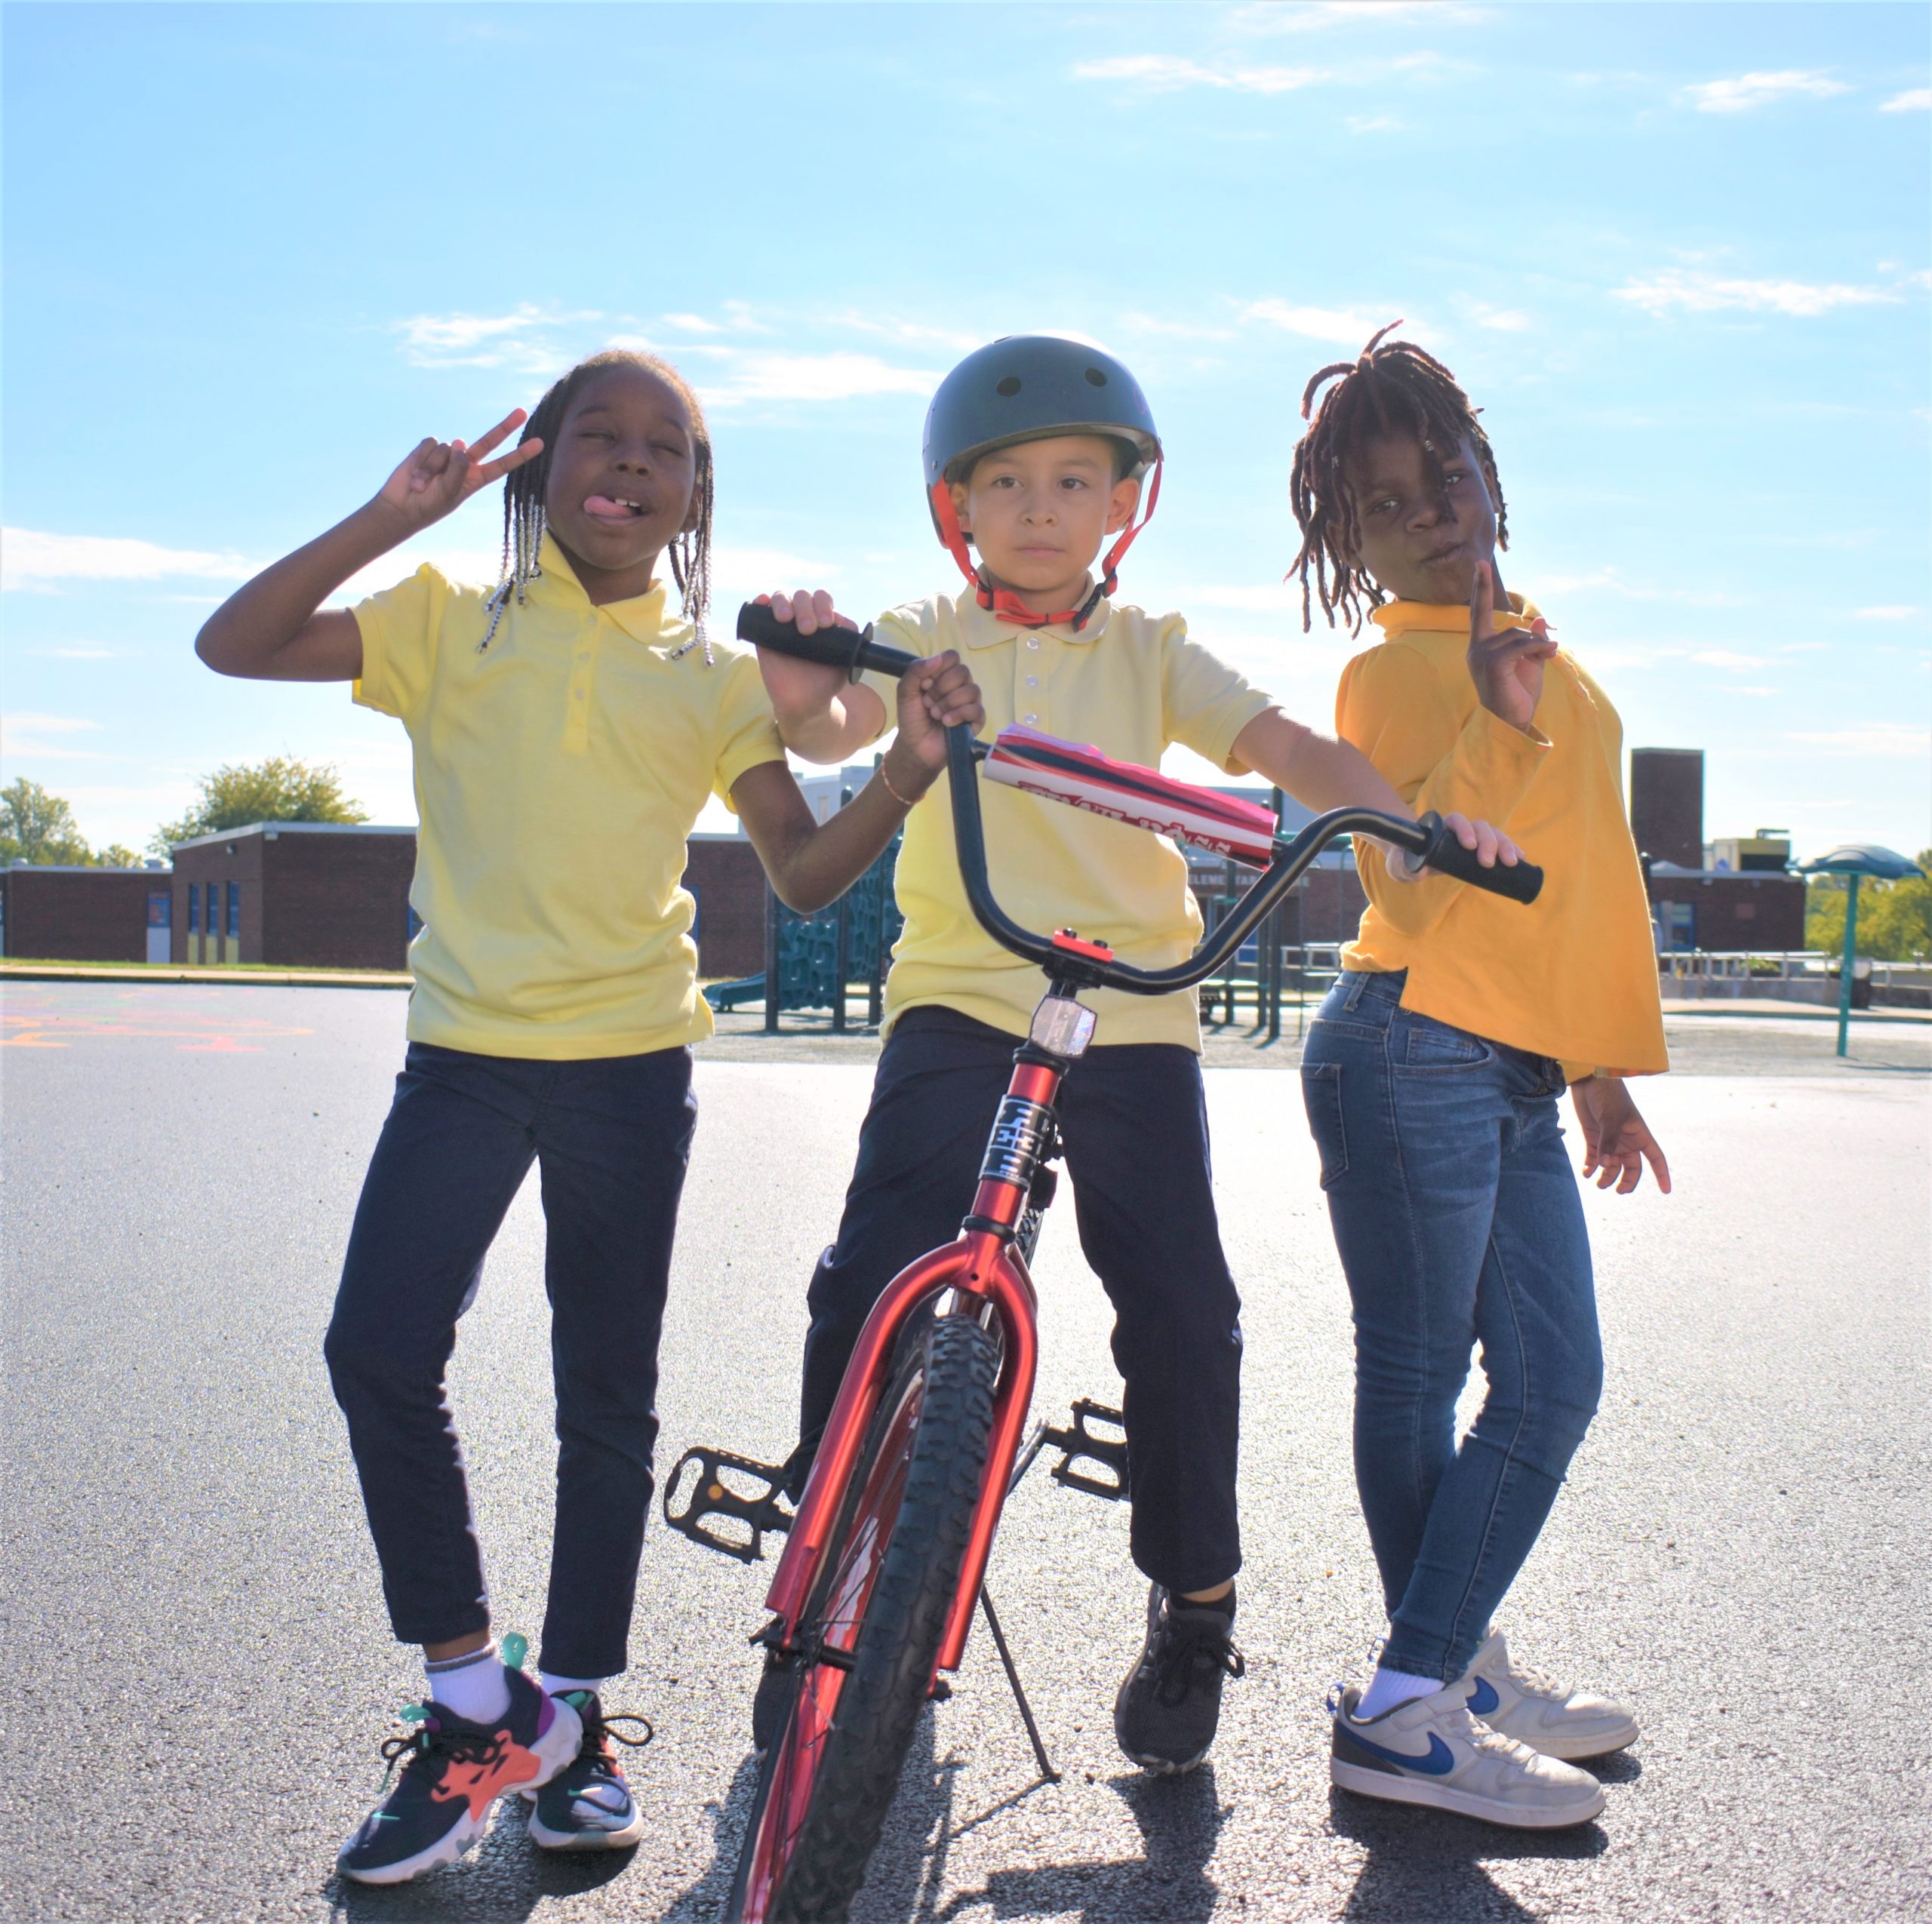 A group of 3 children pose next to a bicycle. 